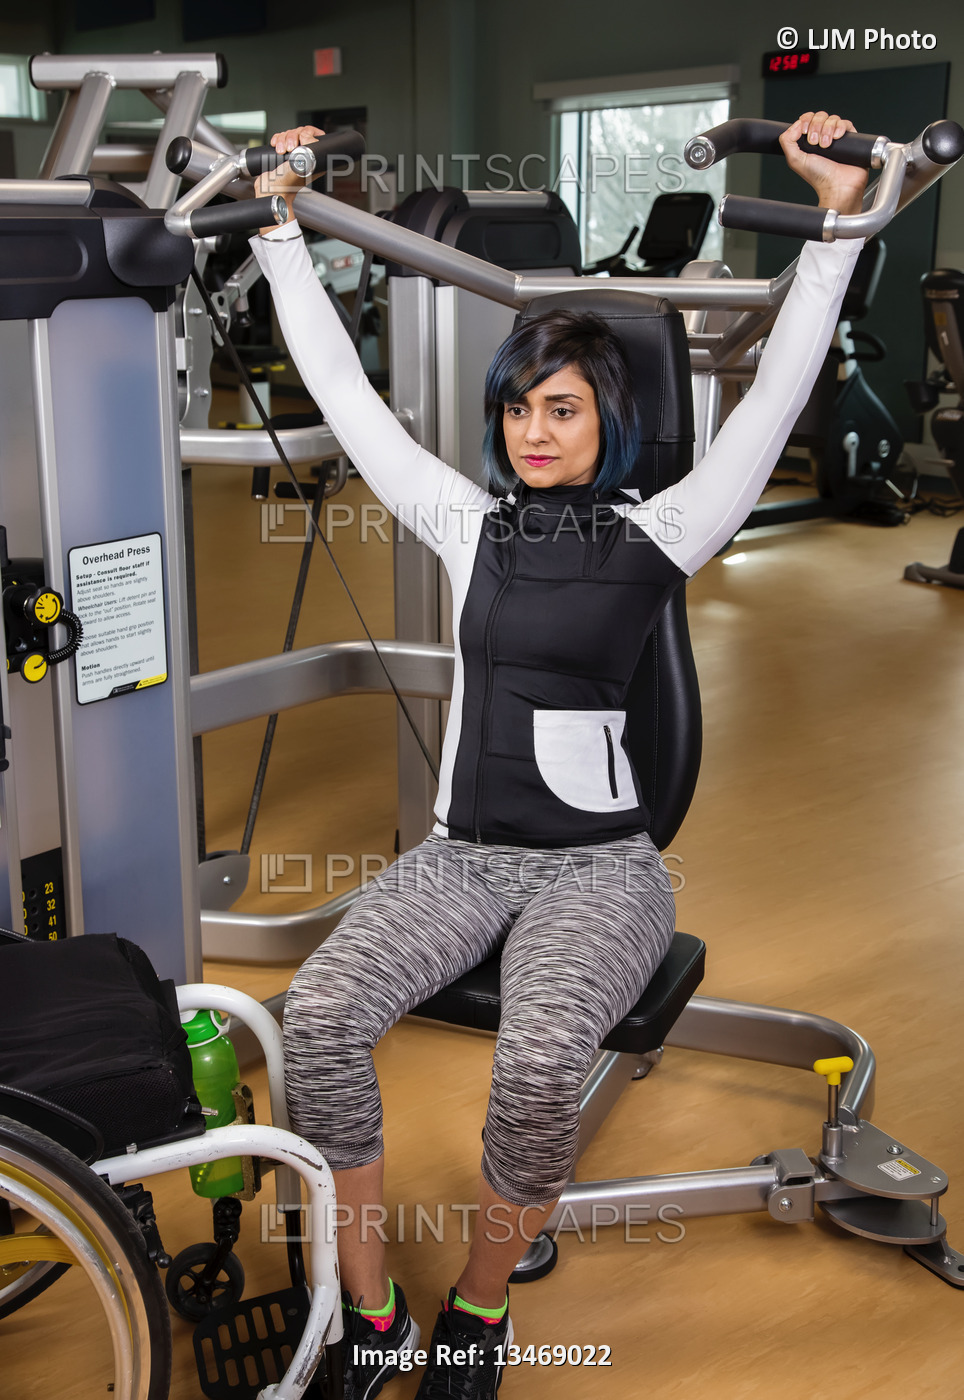 A paraplegic woman working out using an overhead press in a fitness facility; ...